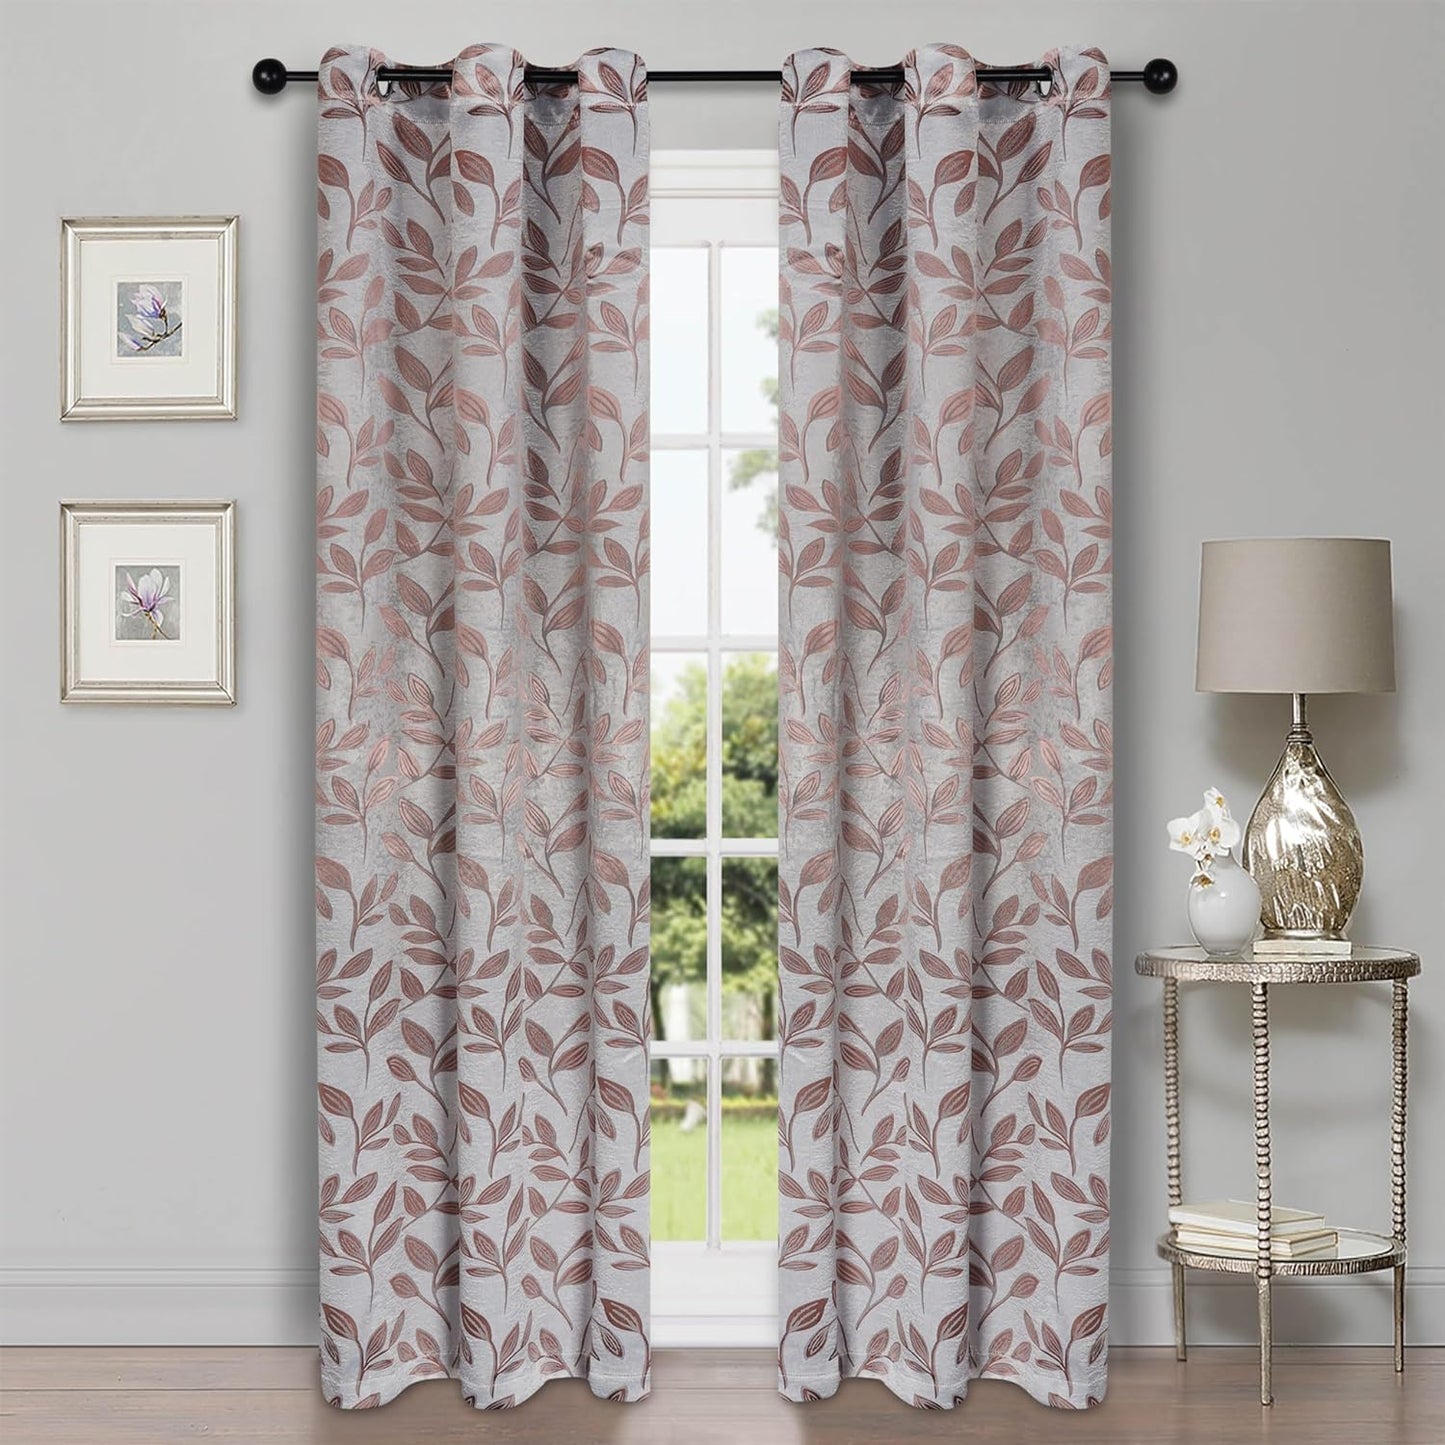 Superior Blackout Curtains, Room Darkening Window Accent for Bedroom, Sun Blocking, Thermal, Modern Bohemian Curtains, Leaves Collection, Set of 2 Panels, Rod Pocket - 52 in X 63 In, Nickel Black  Home City Inc. Champagne 42 In X 96 In (W X L) 